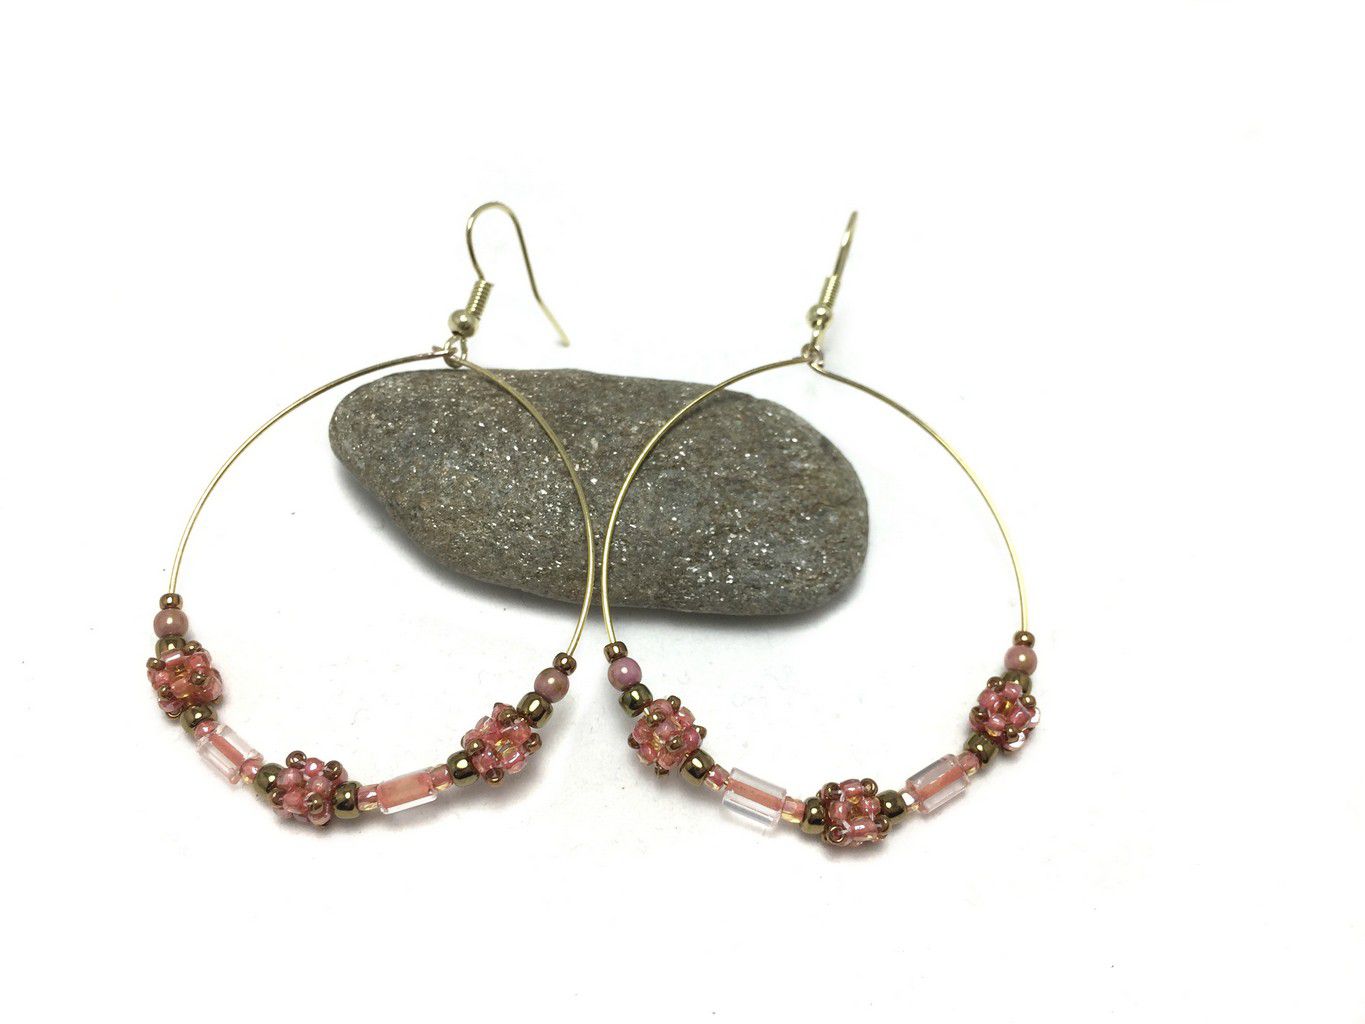 2 inch hoop earrings with coral cubic hand-stitched beads and stuff